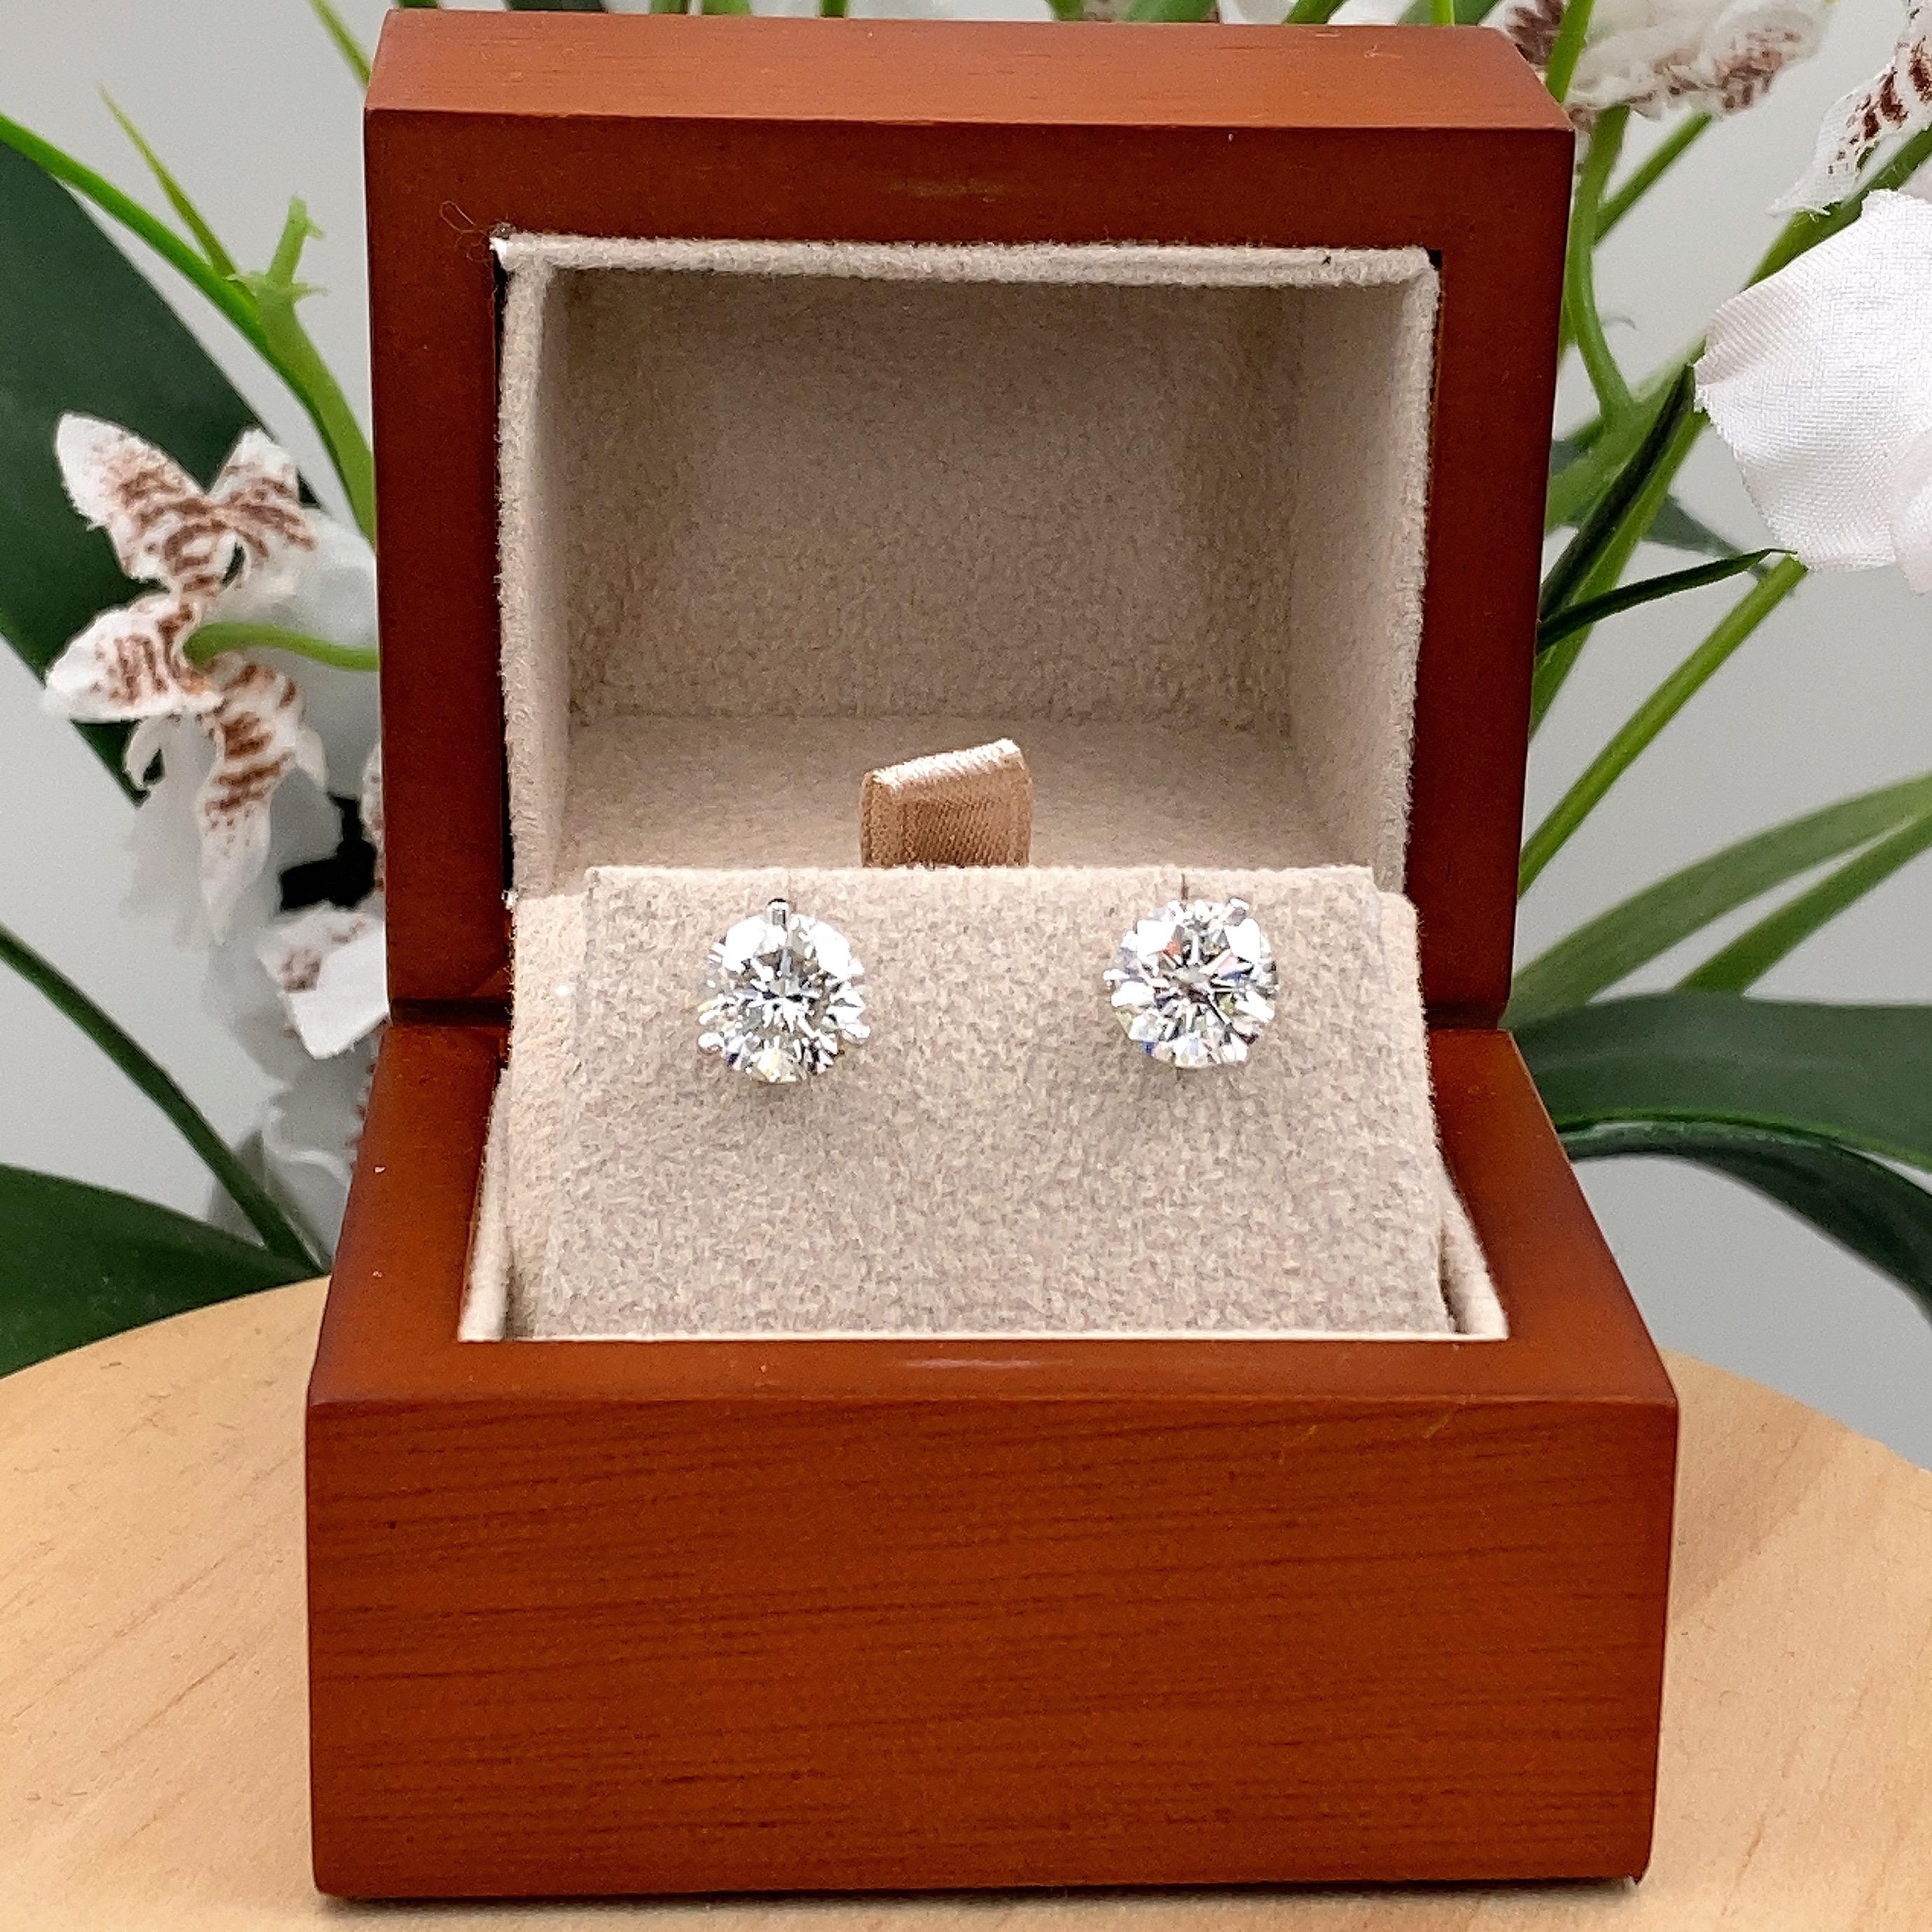 Brand New Round Brilliant Diamond Stud Earrings
Style:  Martini Set
Metal:  14kt White Gold
Size:  Medium
TCW:  3.17 tcw
Main Diamond:  2 Round Brilliant Diamonds 1.56 cts & 1.61 cts
Color & Clarity:  H - I, I1  
Hallmark:  585
Includes:  Certified